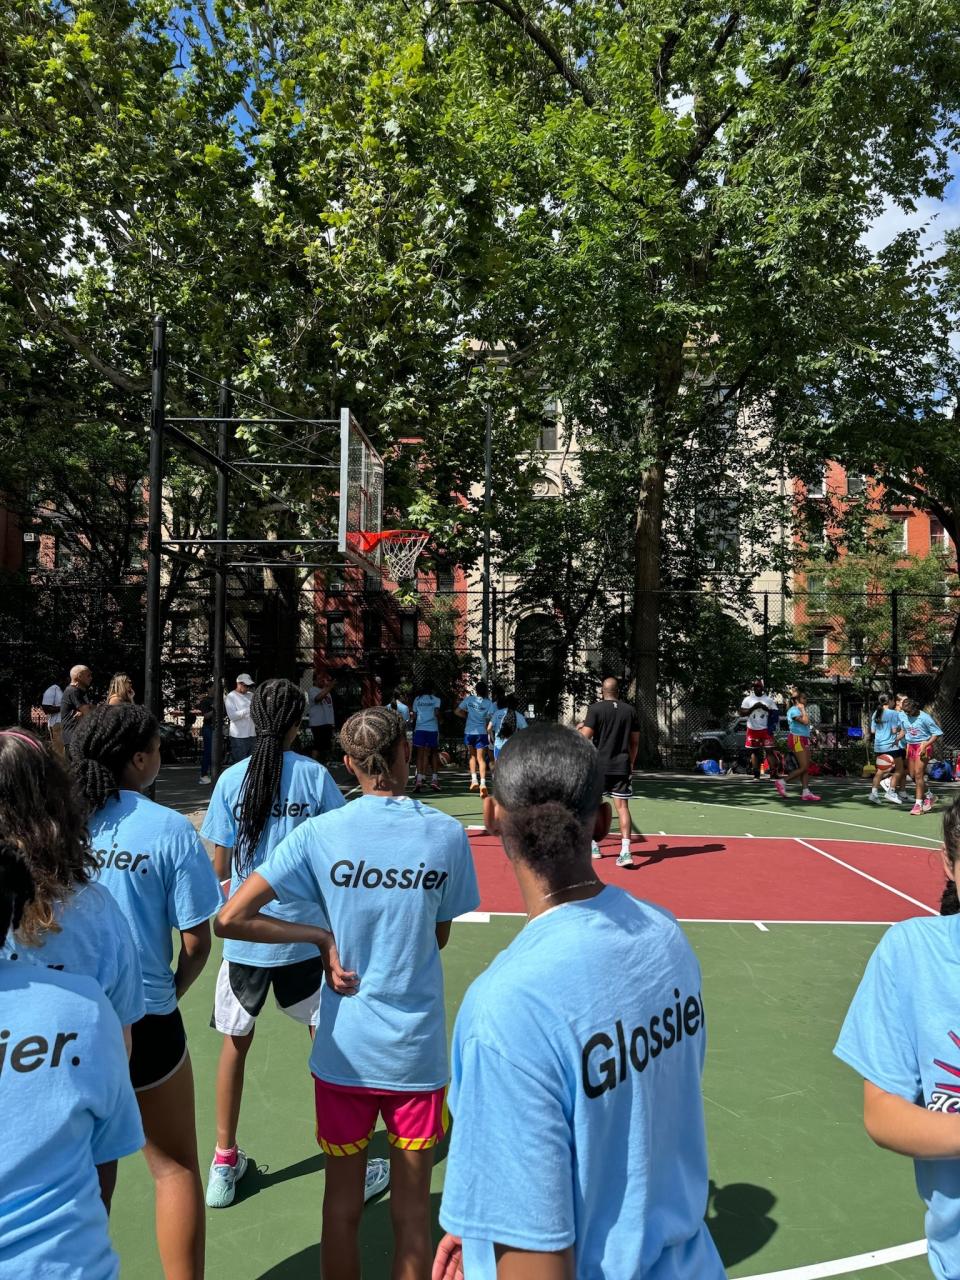 Local girls' basketball teams convened at Glossier's court unveiling on Monday. 